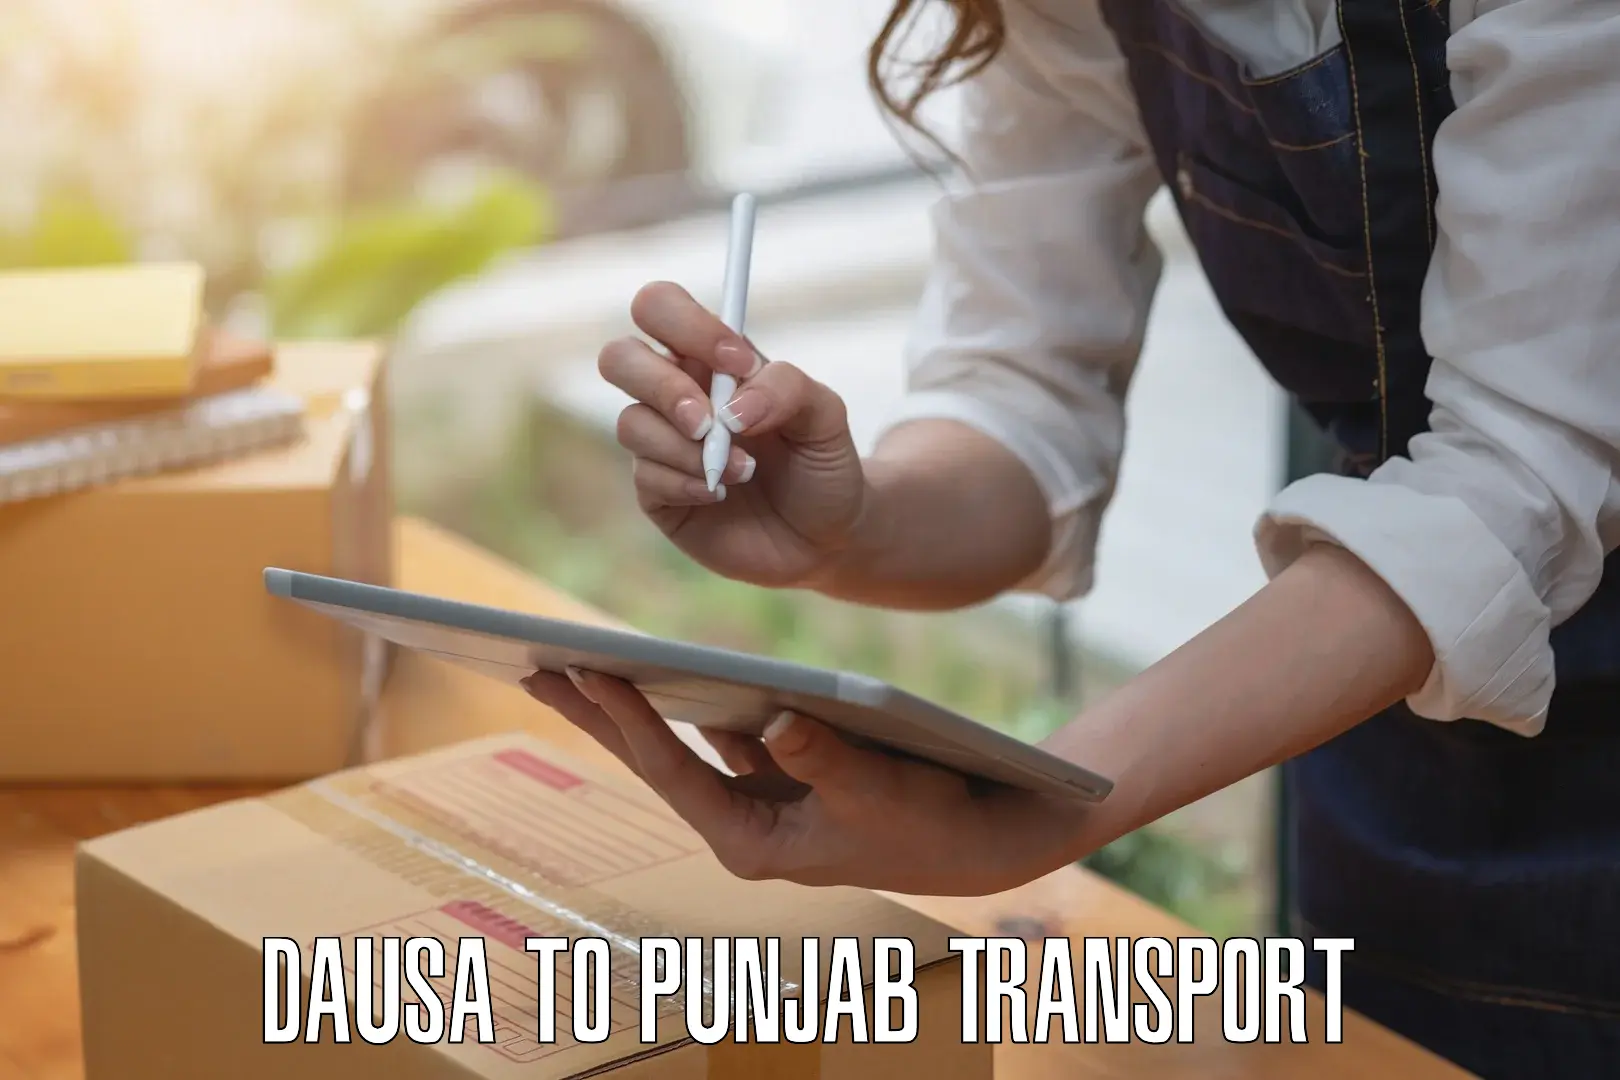 Transport bike from one state to another Dausa to Hoshiarpur